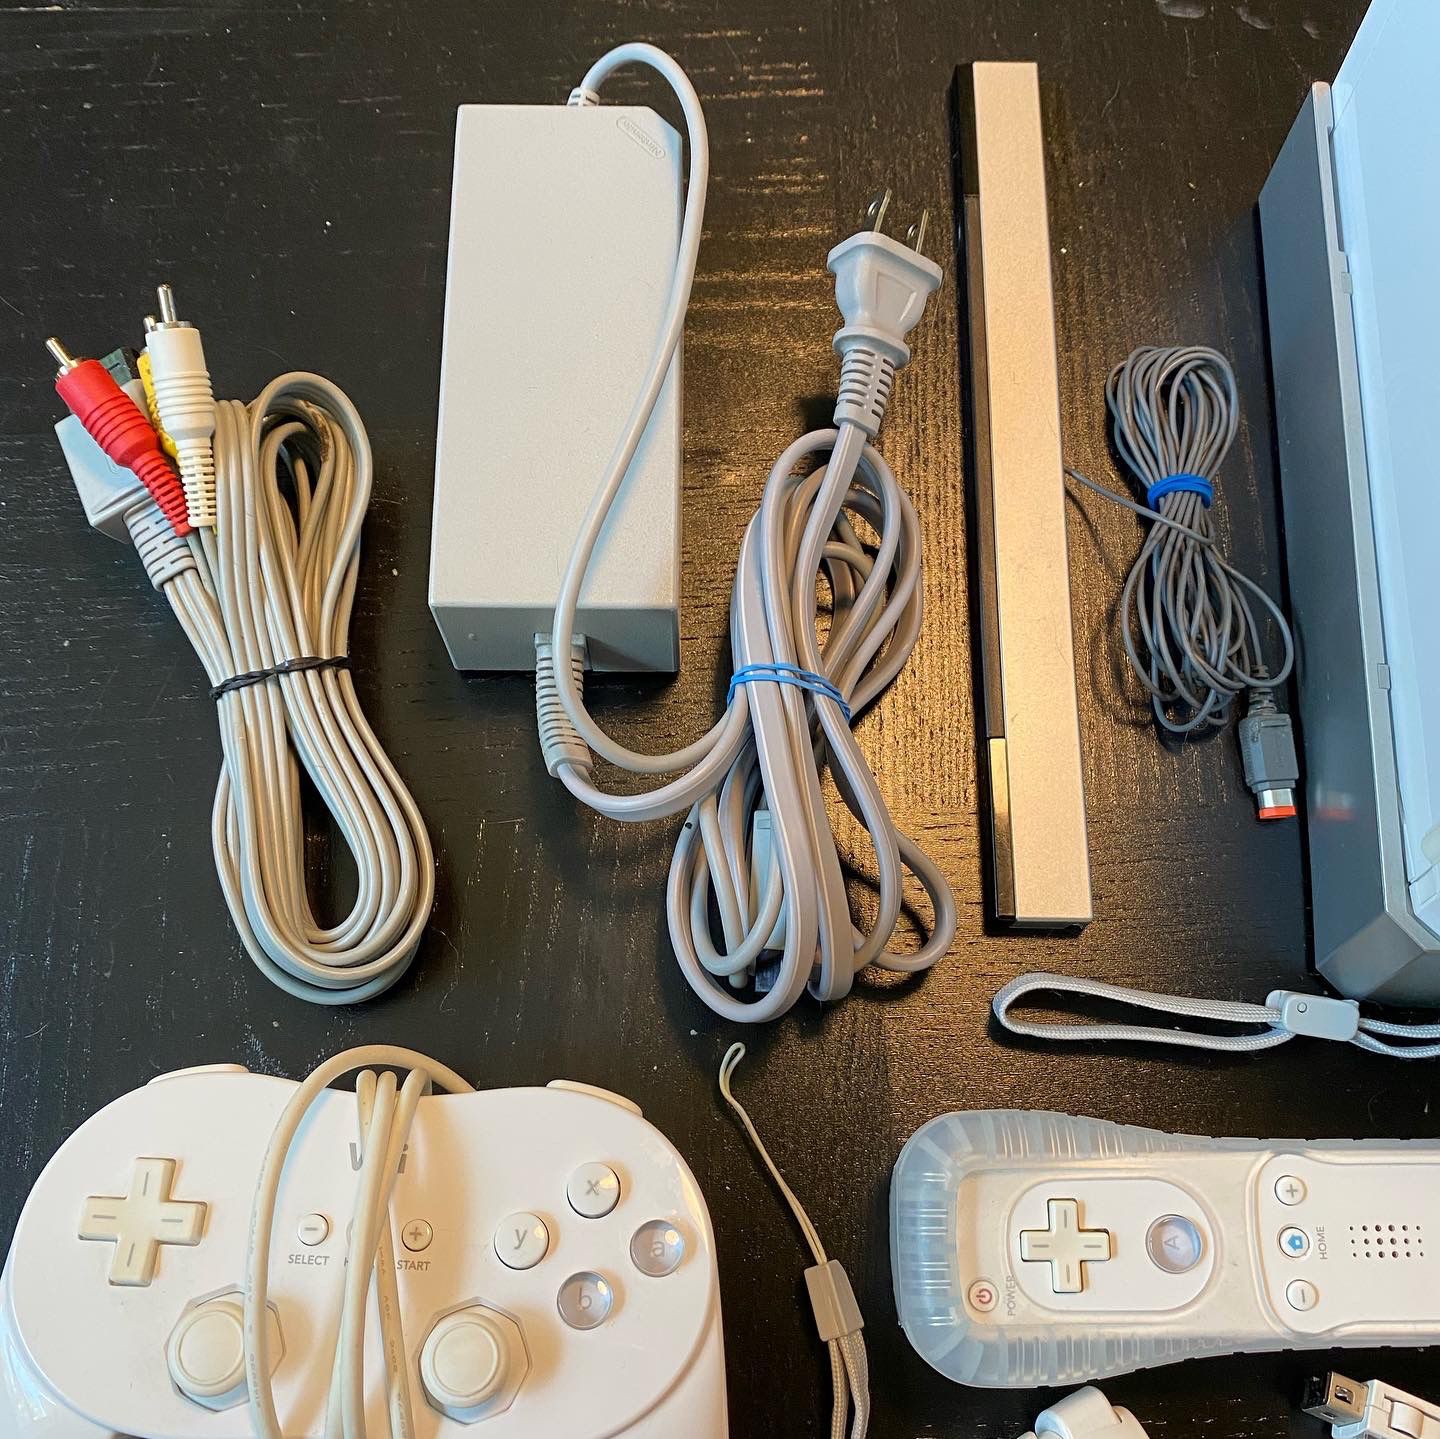 Nintendo Wii Console Bundle RVL-001 GameCube Compatible w/ Wii Sports Video Game